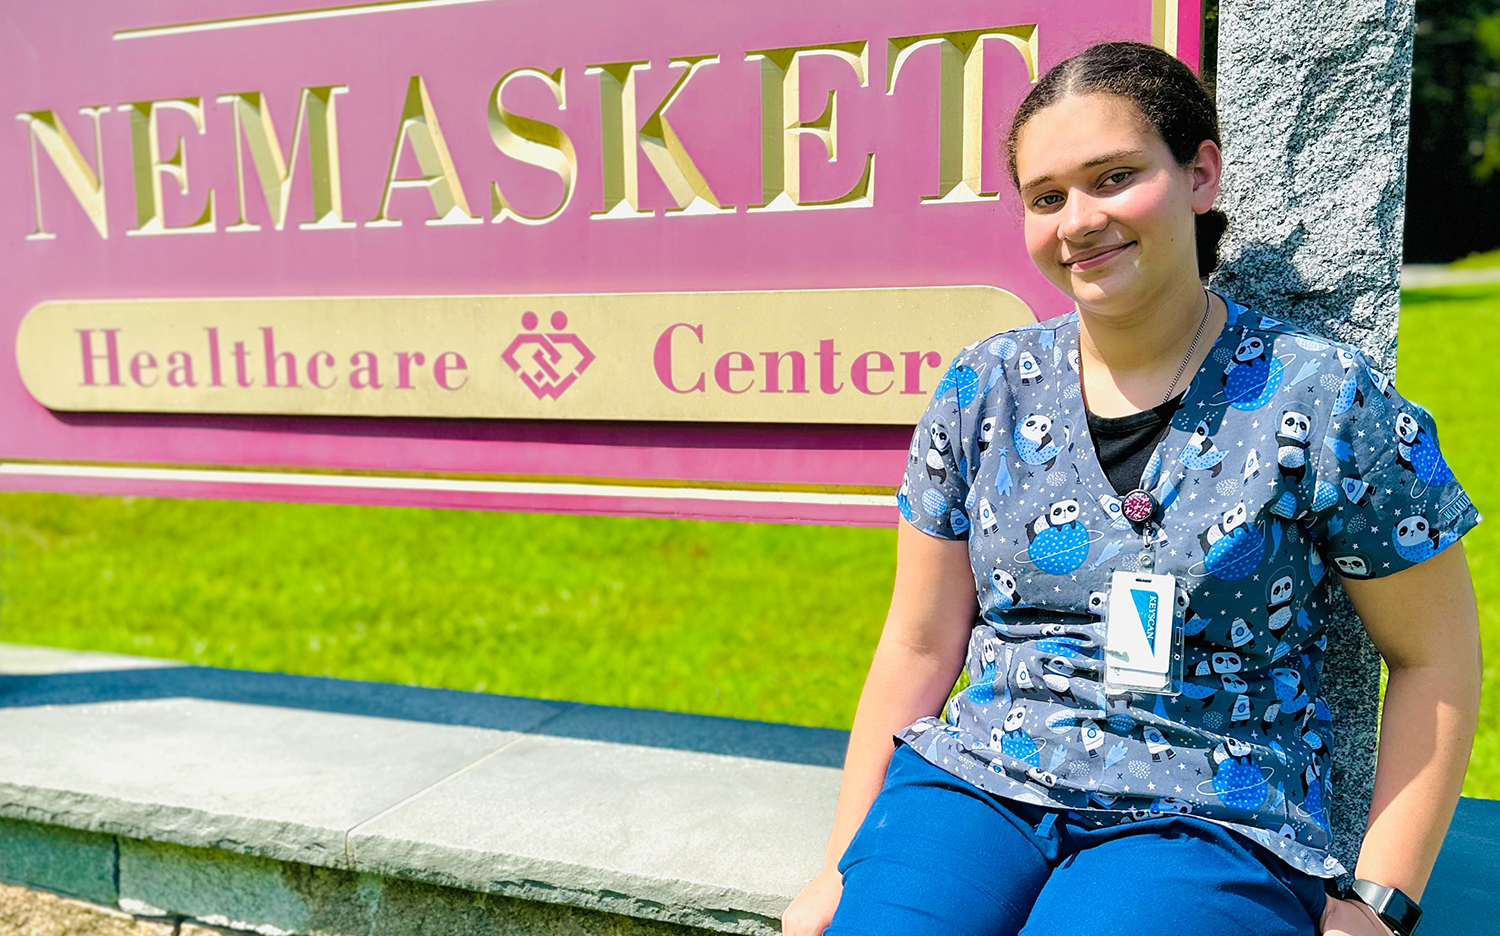 Partnership between Nemasket Healthcare Center and Old Colony Technical School is a win-win-win for everyone with the hire of Alaysha Mendes as Certified Nursing Assistant.